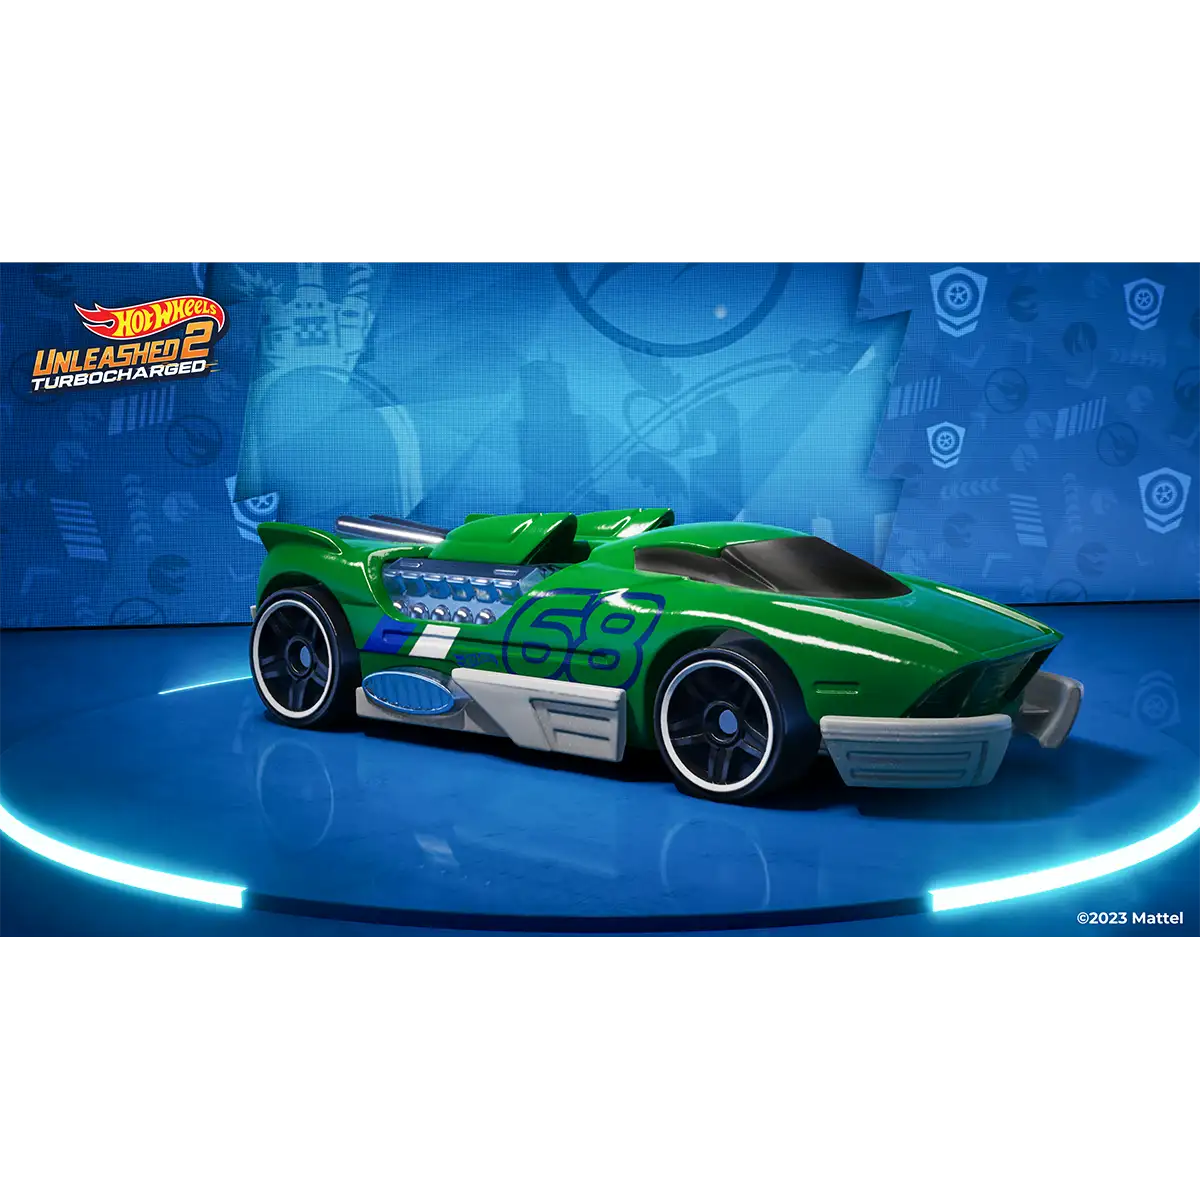 Hot Wheels Unleashed 2 Turbocharged Pure Fire Edition (Xbox One / Xbox Series X) Image 6